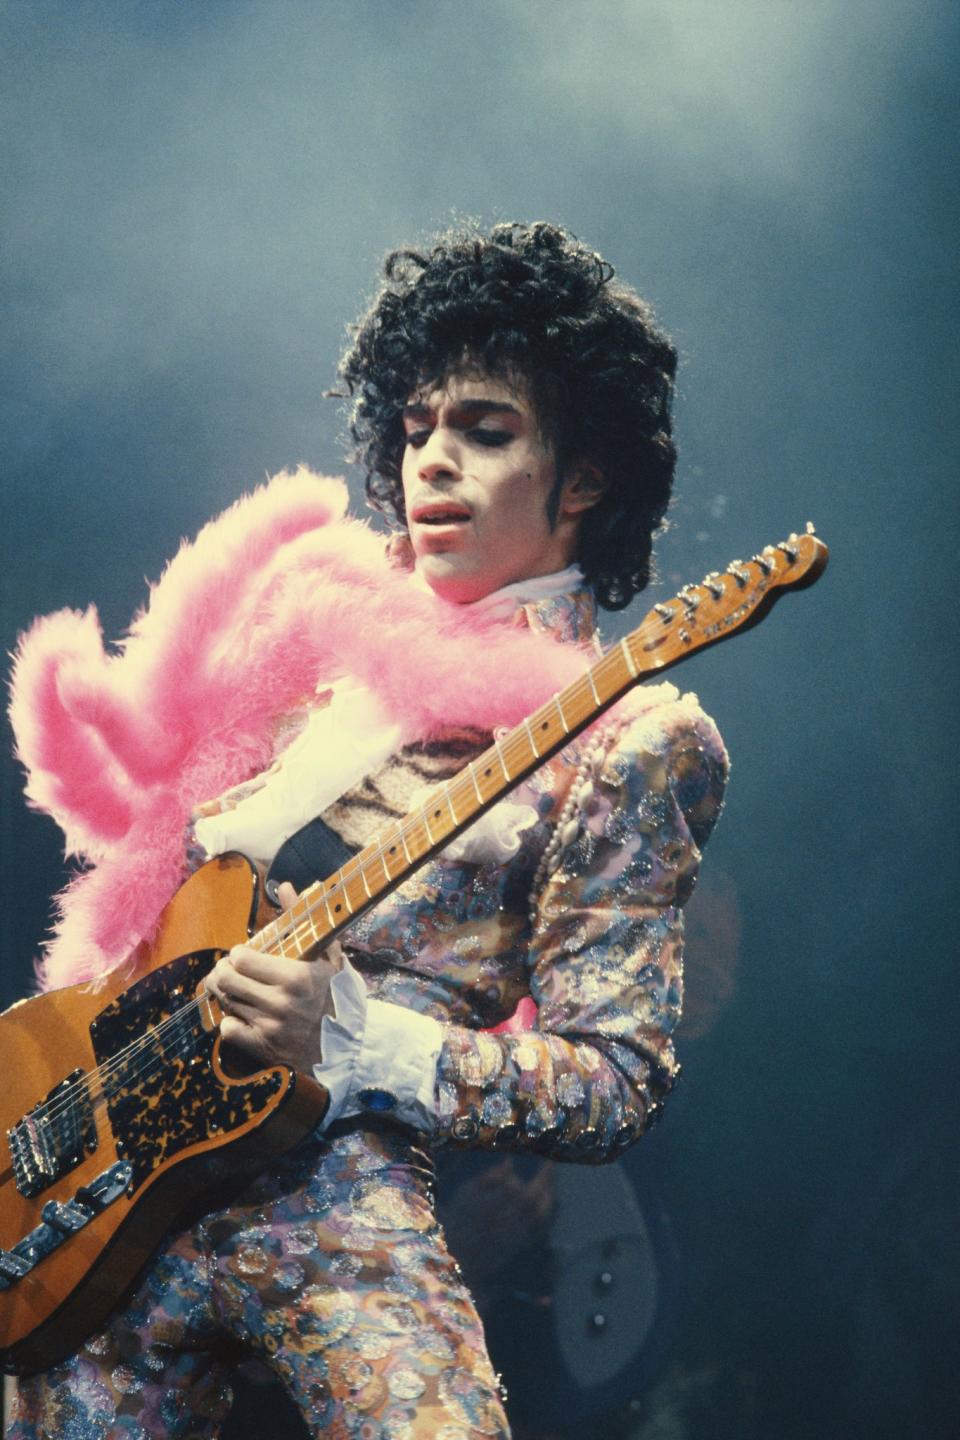 <p>Cuban heeled boots, co-ords, peasant blouses and, erm, bottomless-trousers were just some of the iconic pieces inside Prince’s outrageous wardrobe, which defied gender expectations magnificently. [Photo: Getty] </p>